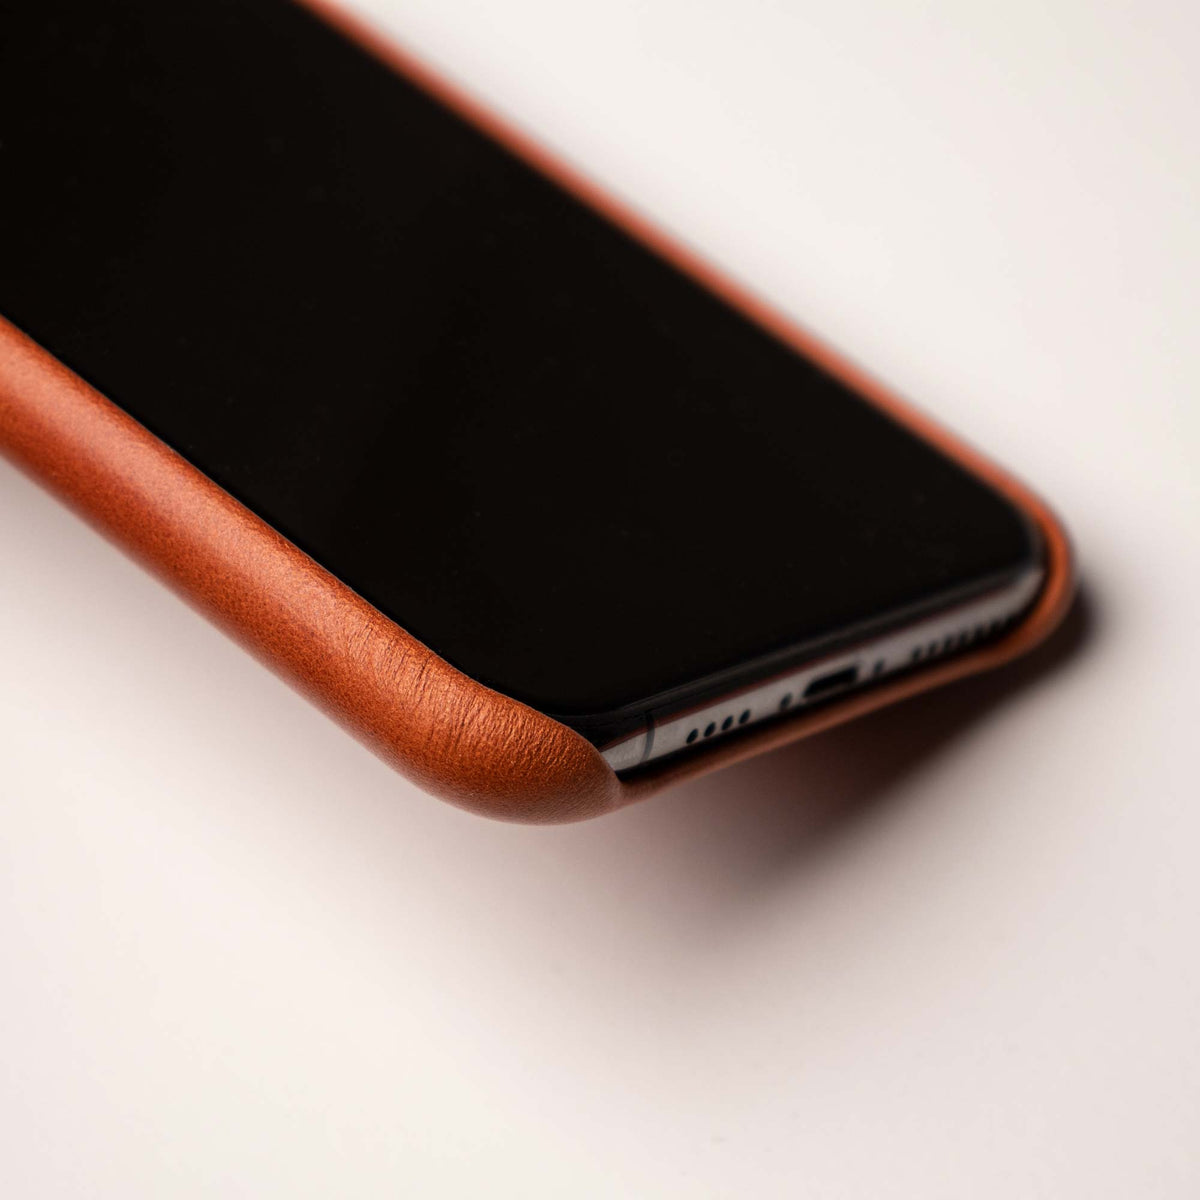 Leather iPhone X/Xs Shell Case - Saddle Brown - RYAN London